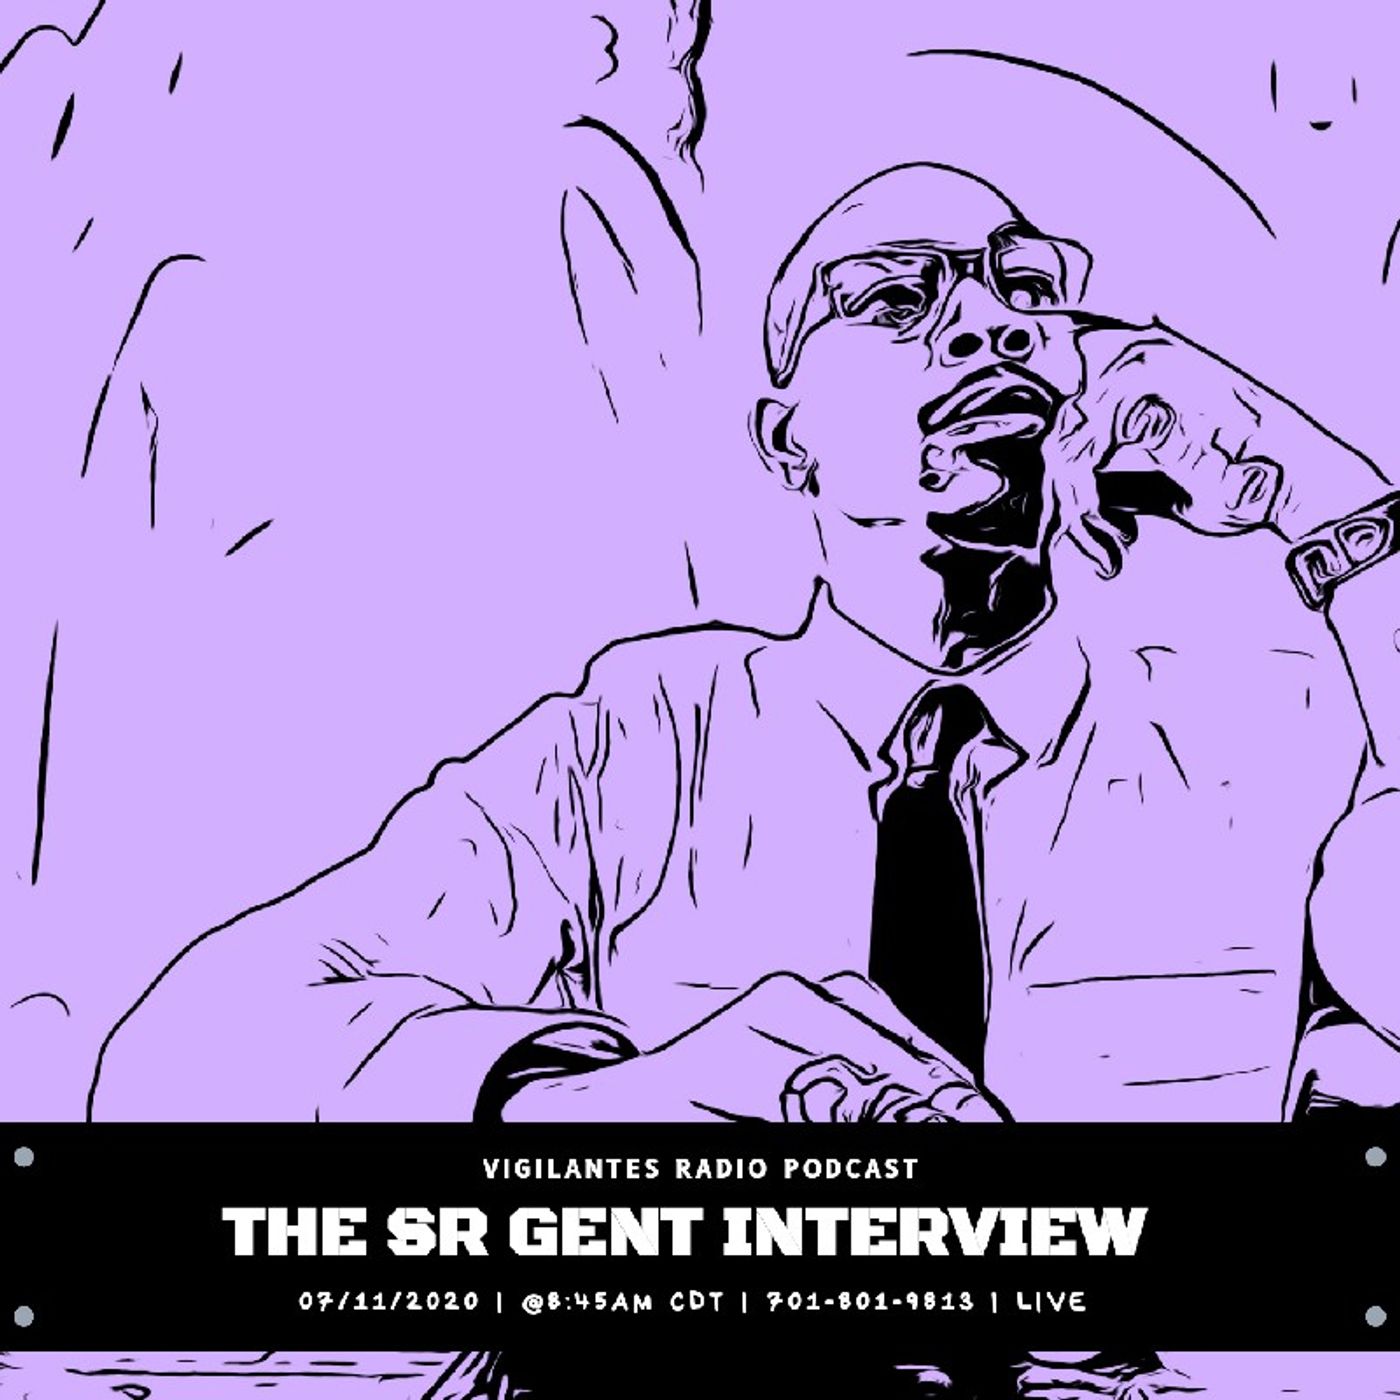 The SR Gent Interview. Image